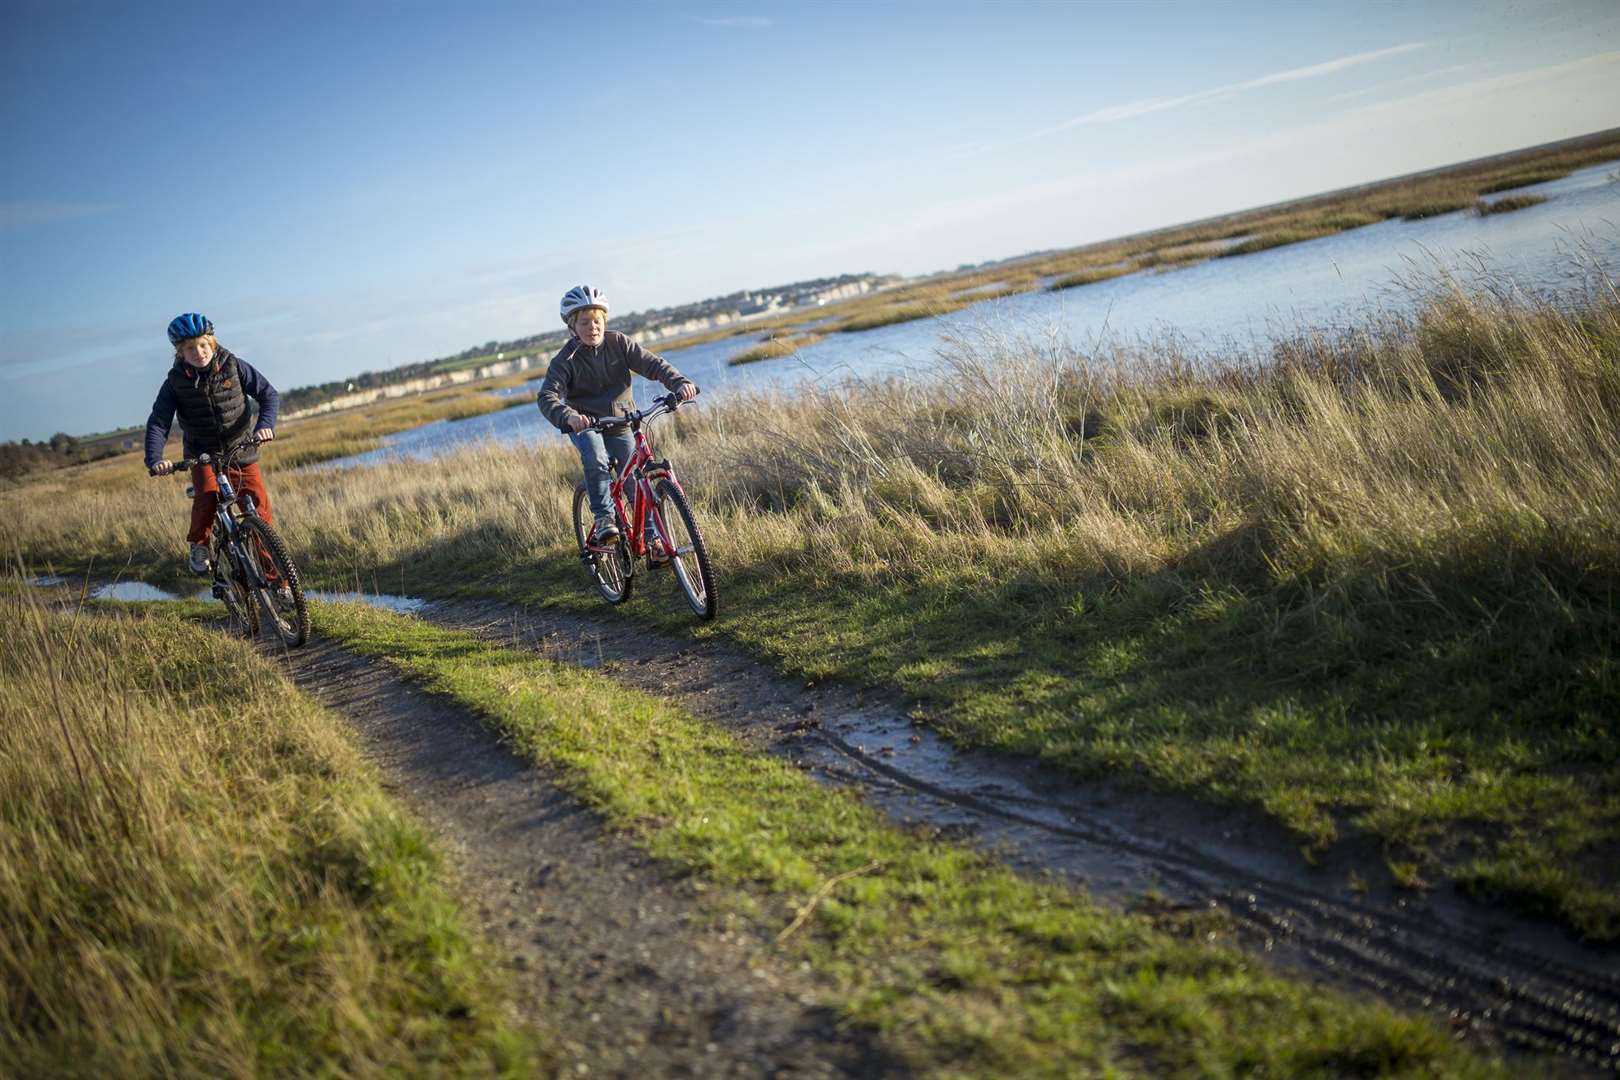 The Viking Coastal Trail provides a picturesque cycle along the coast